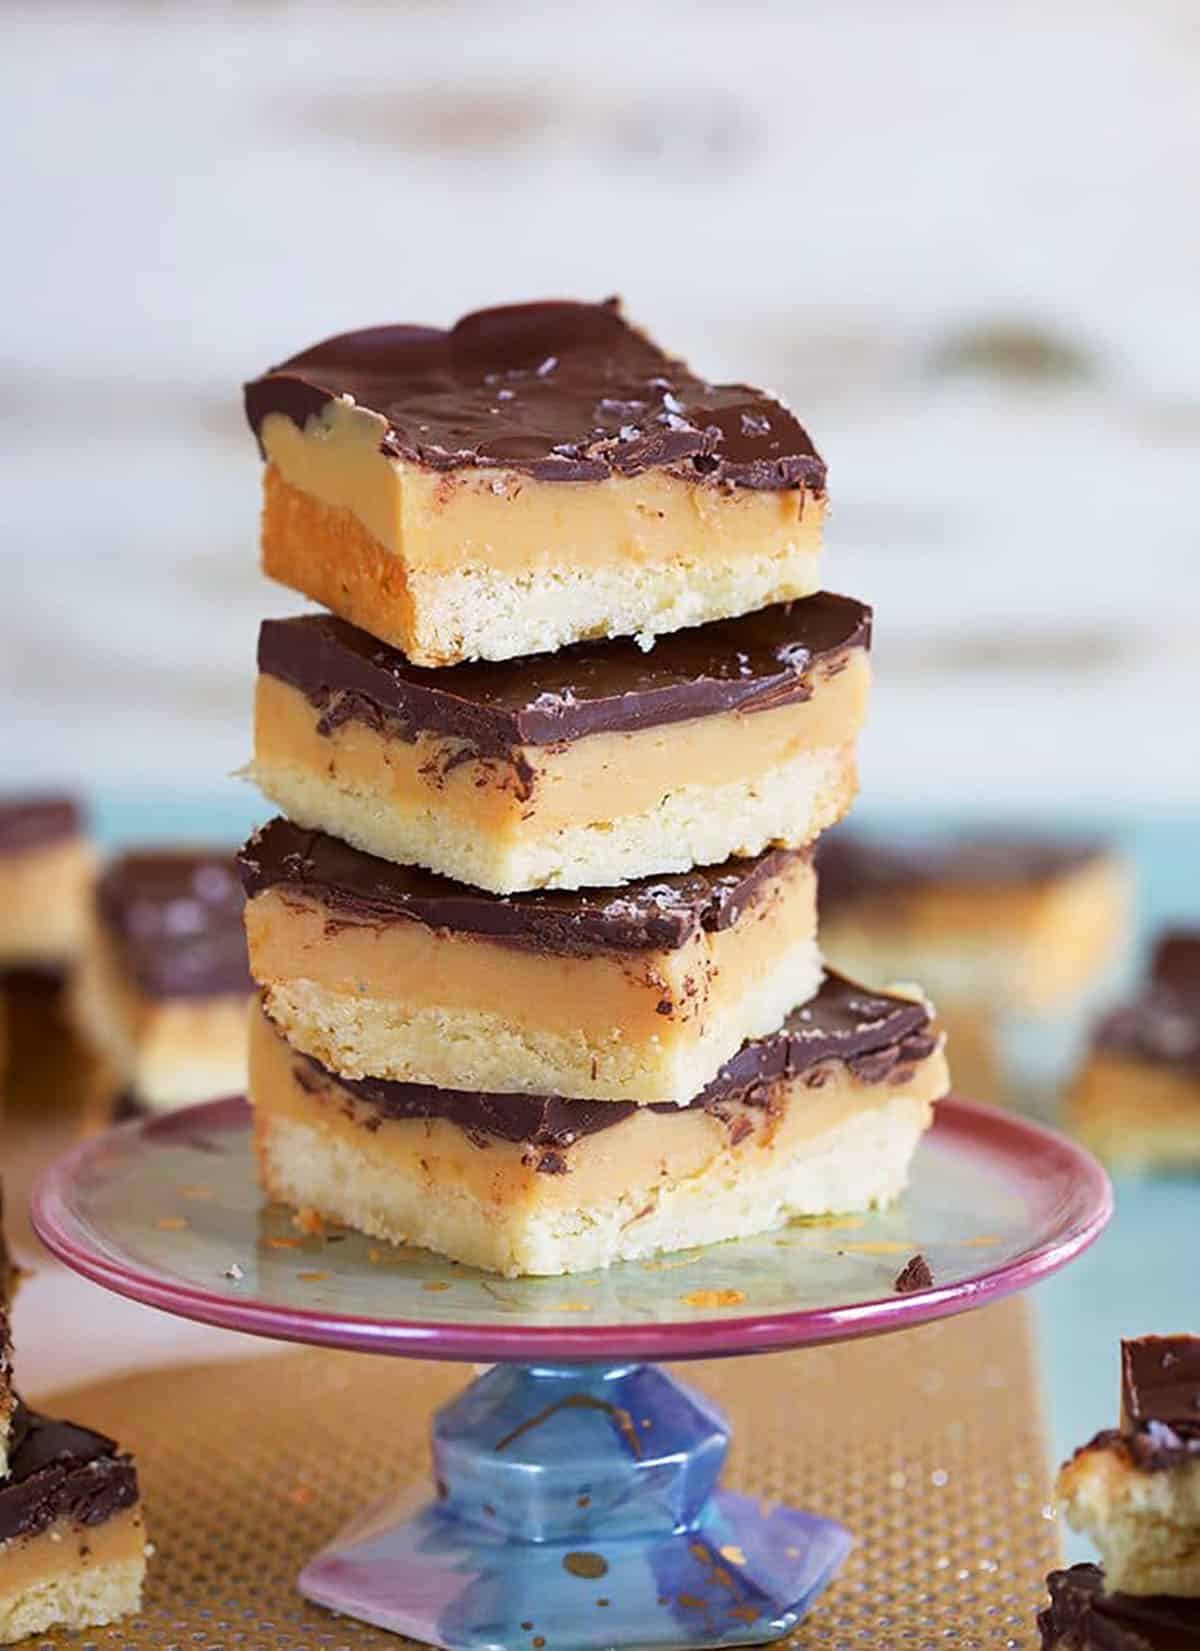 Stack of 4 Millionaire Shortbread Bars on a cupcake stand.